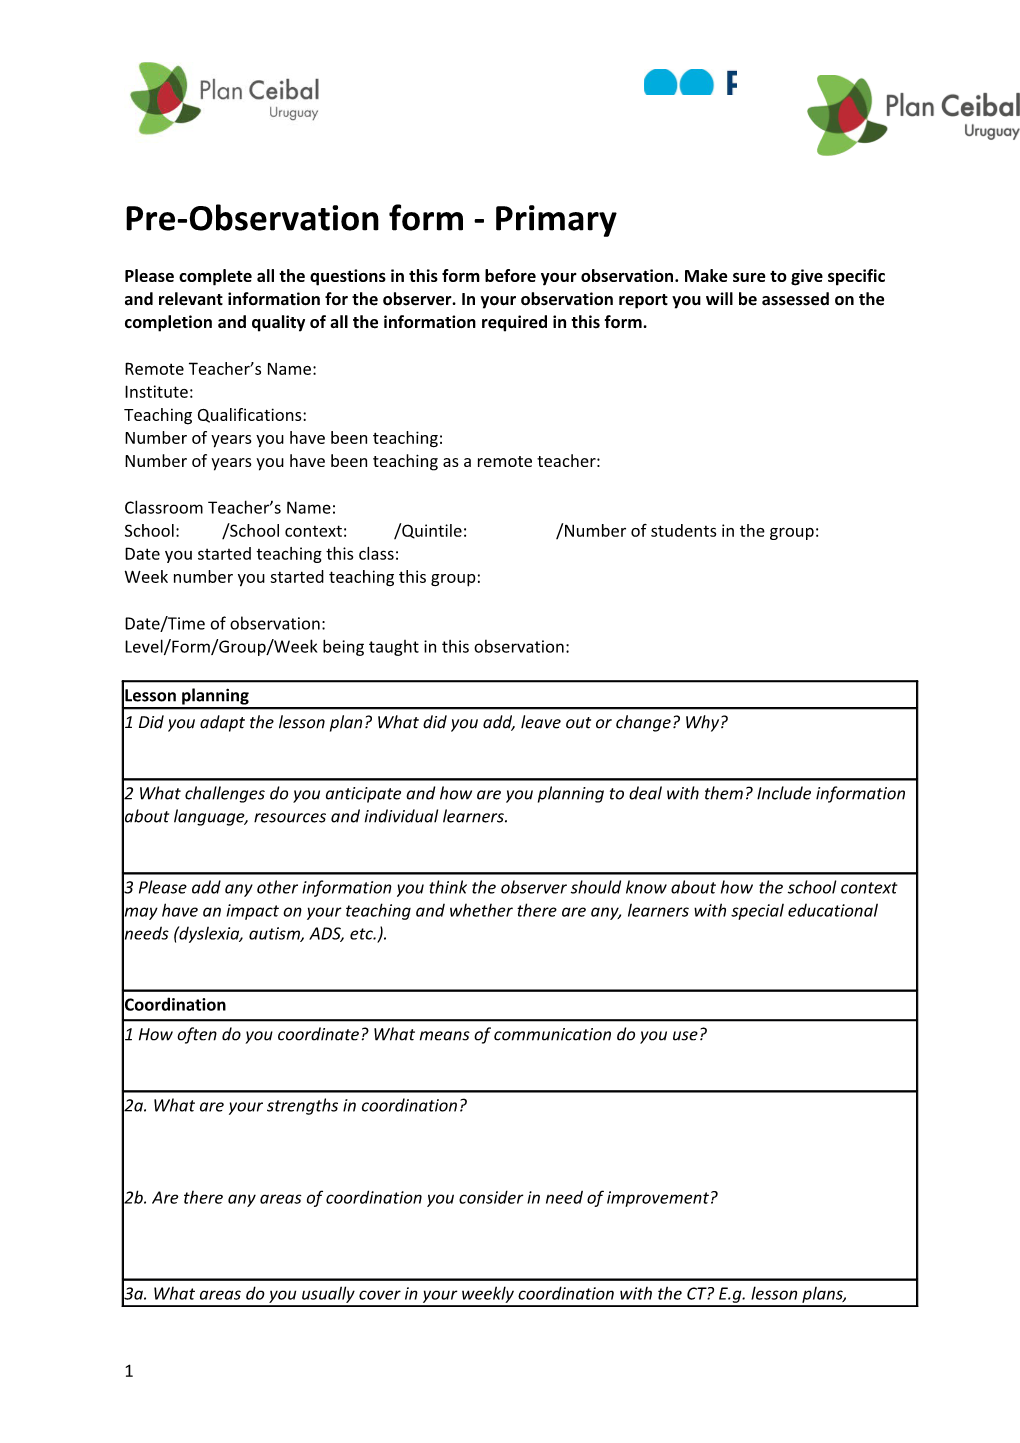 Pre-Observation Form- Primary